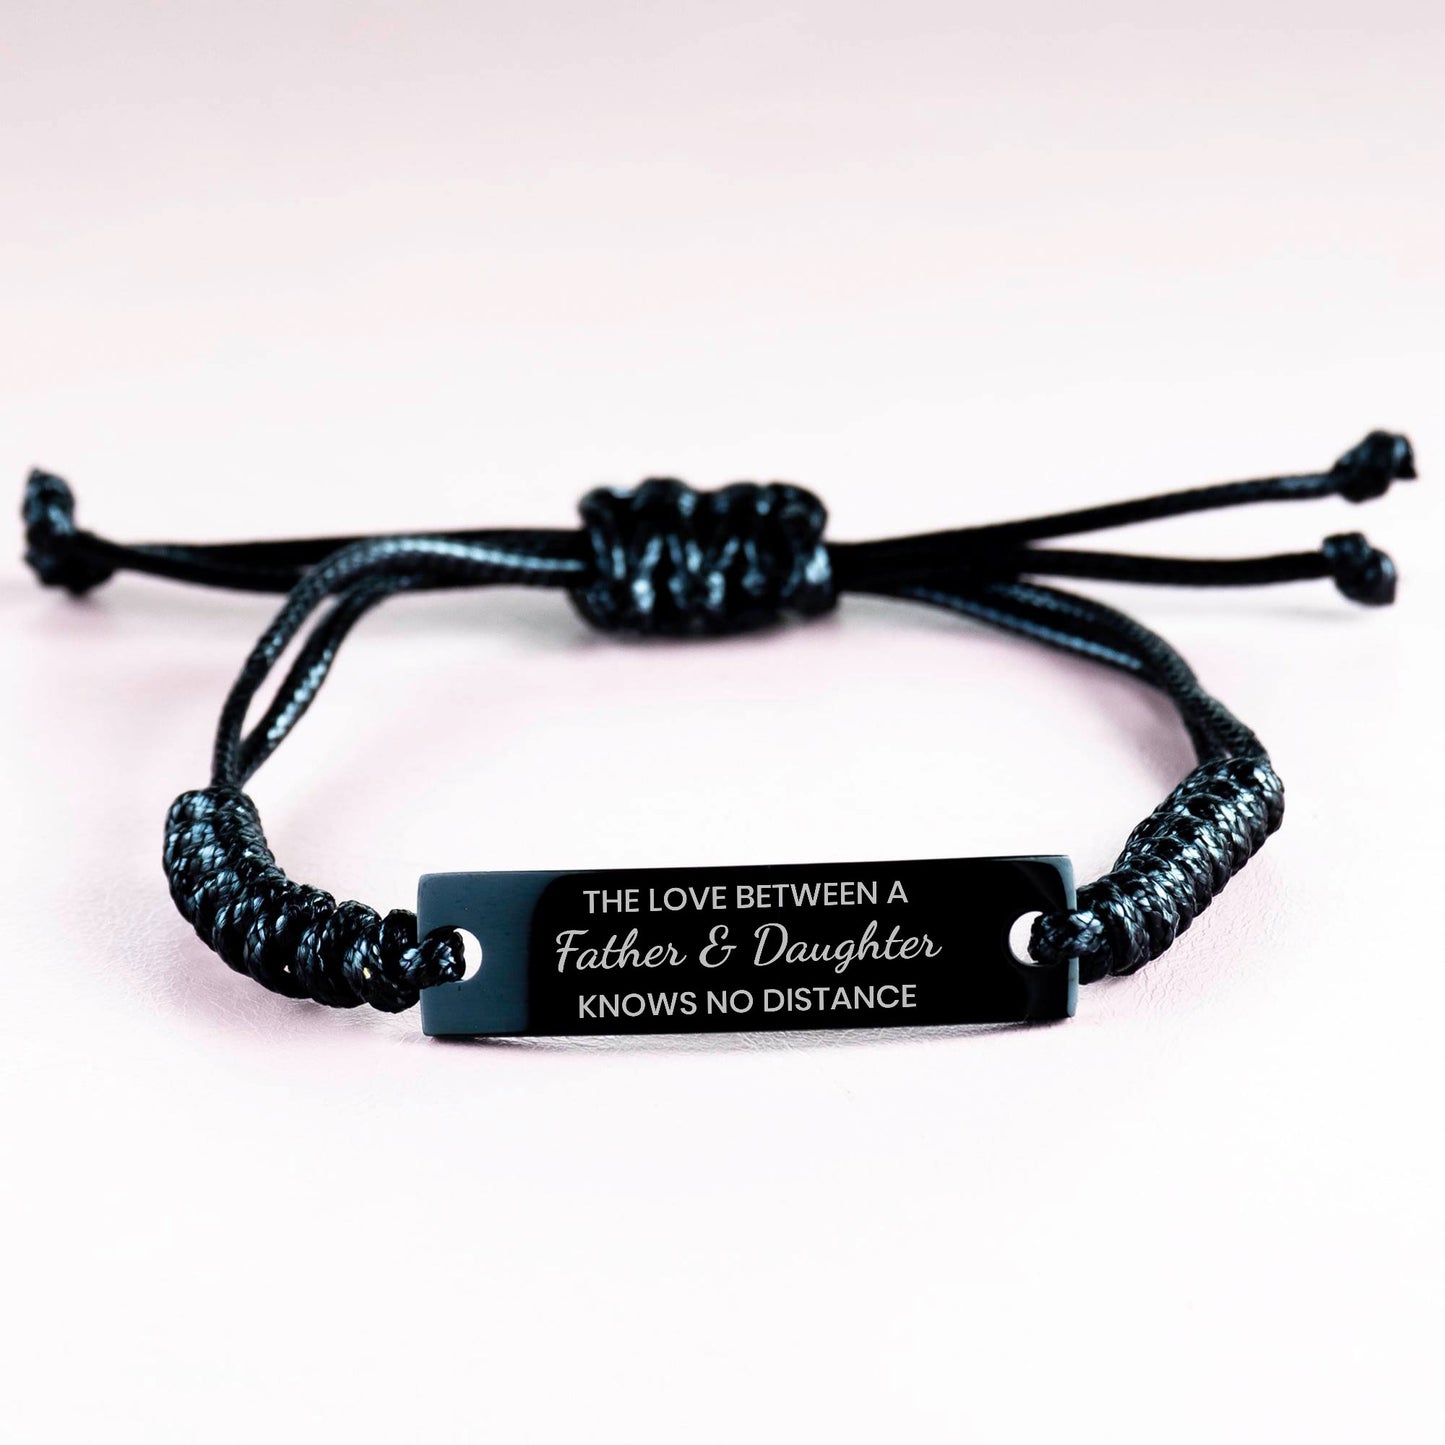 The Love Between a Father and Daughter Knows No Distance Bracelet, Father Daughter Bracelet, Black Braided Rope Bracelet